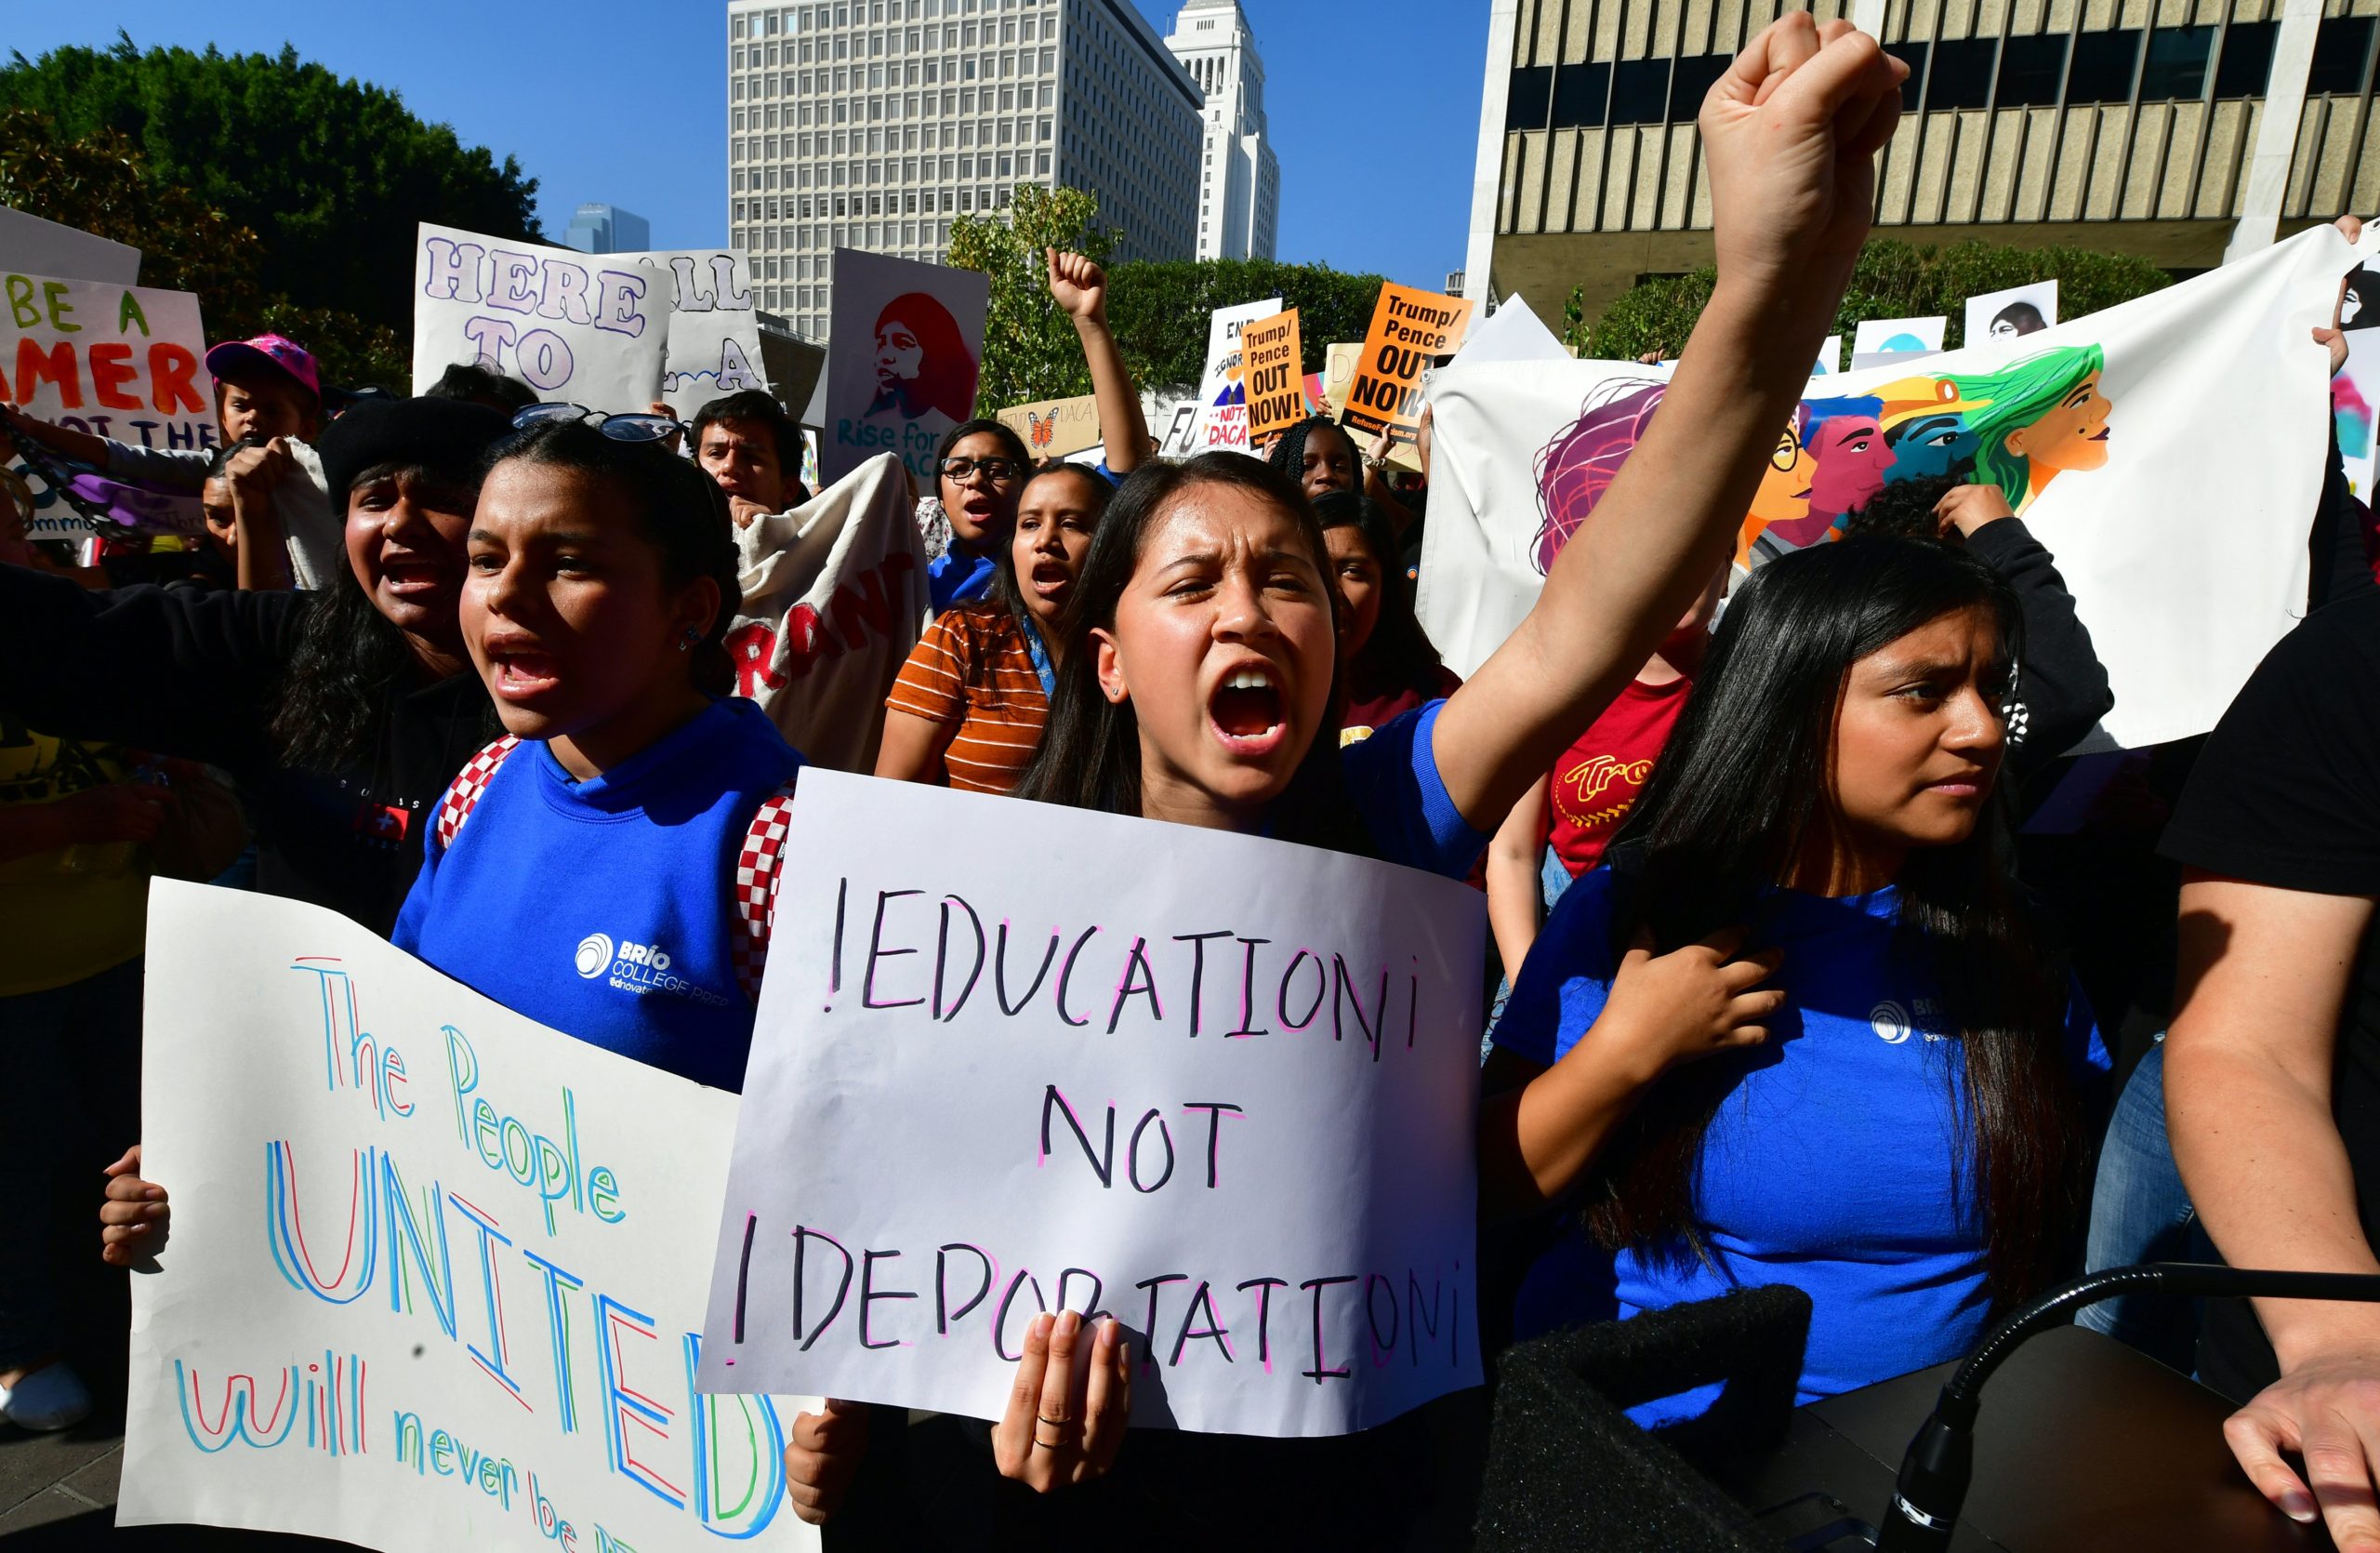 Students and supporters of DACA rally in downtown Los Angeles, California on November 12, 2019 as the US Supreme Court hears arguments to make a decision regarding the future of "Dreamers" as beneficiaries of DACA(Deferred Action for Childhood Arrivals)are known.